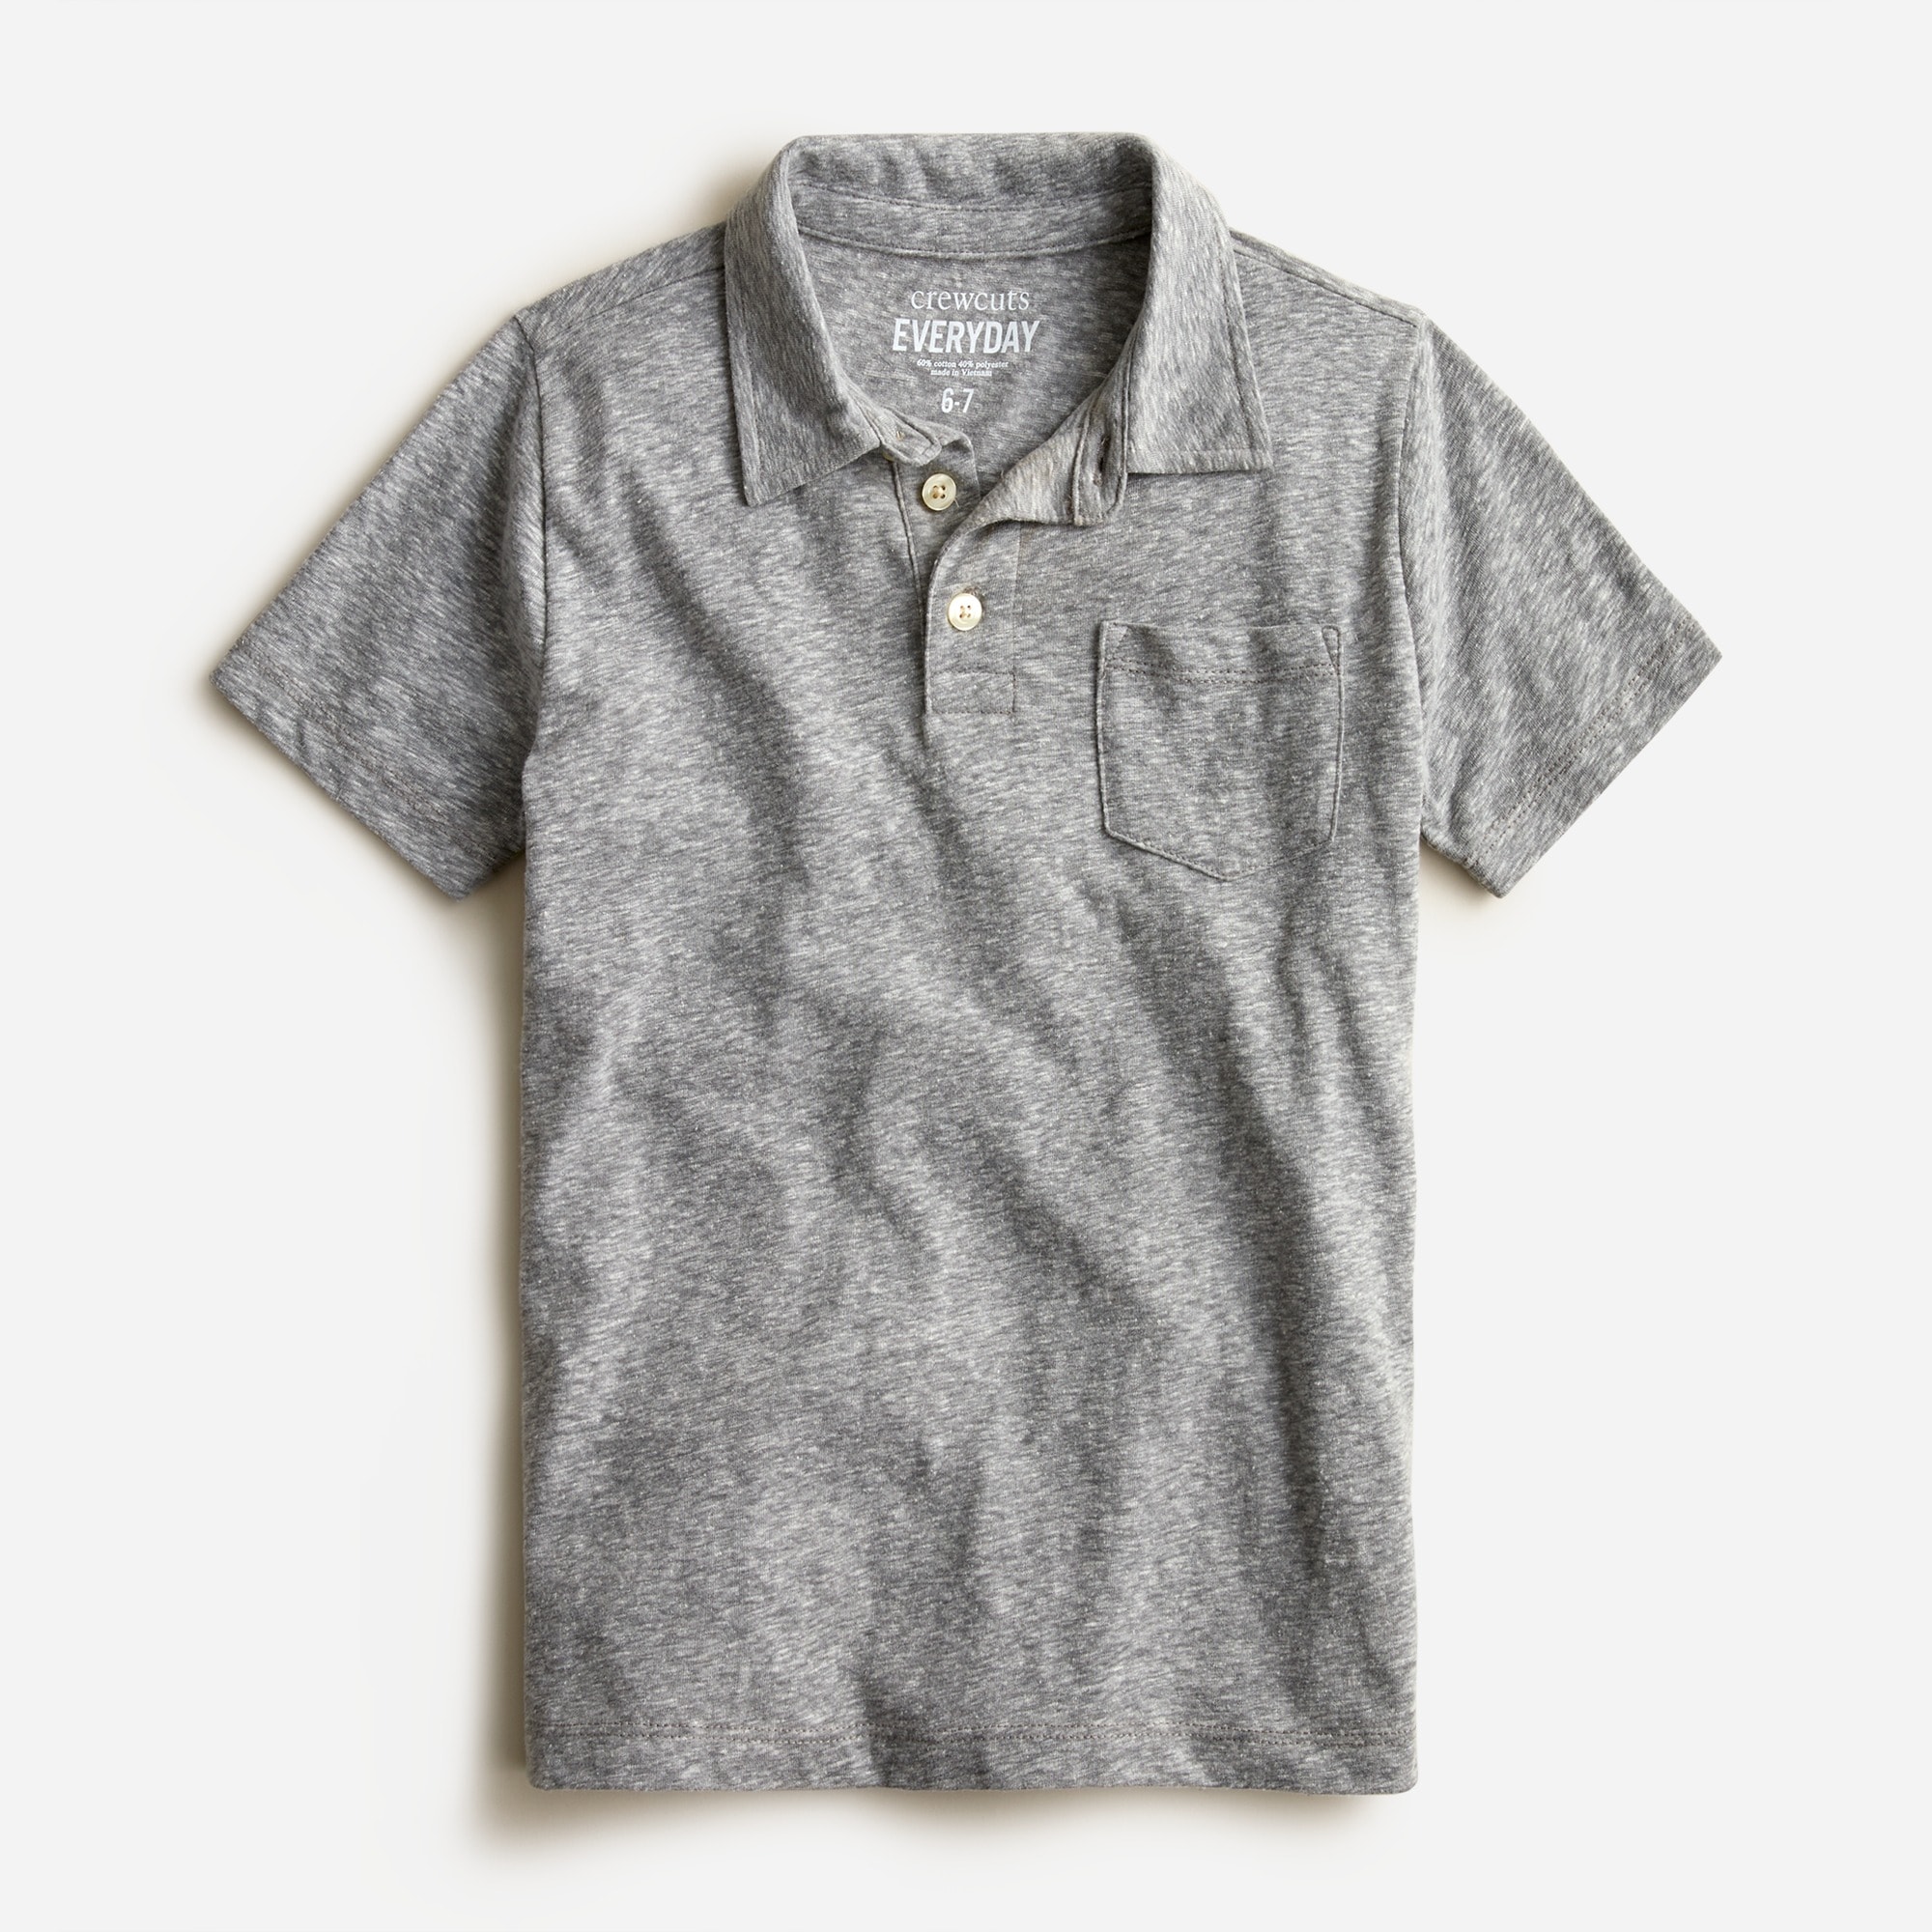 boys Kids' polo shirt in the softest jersey